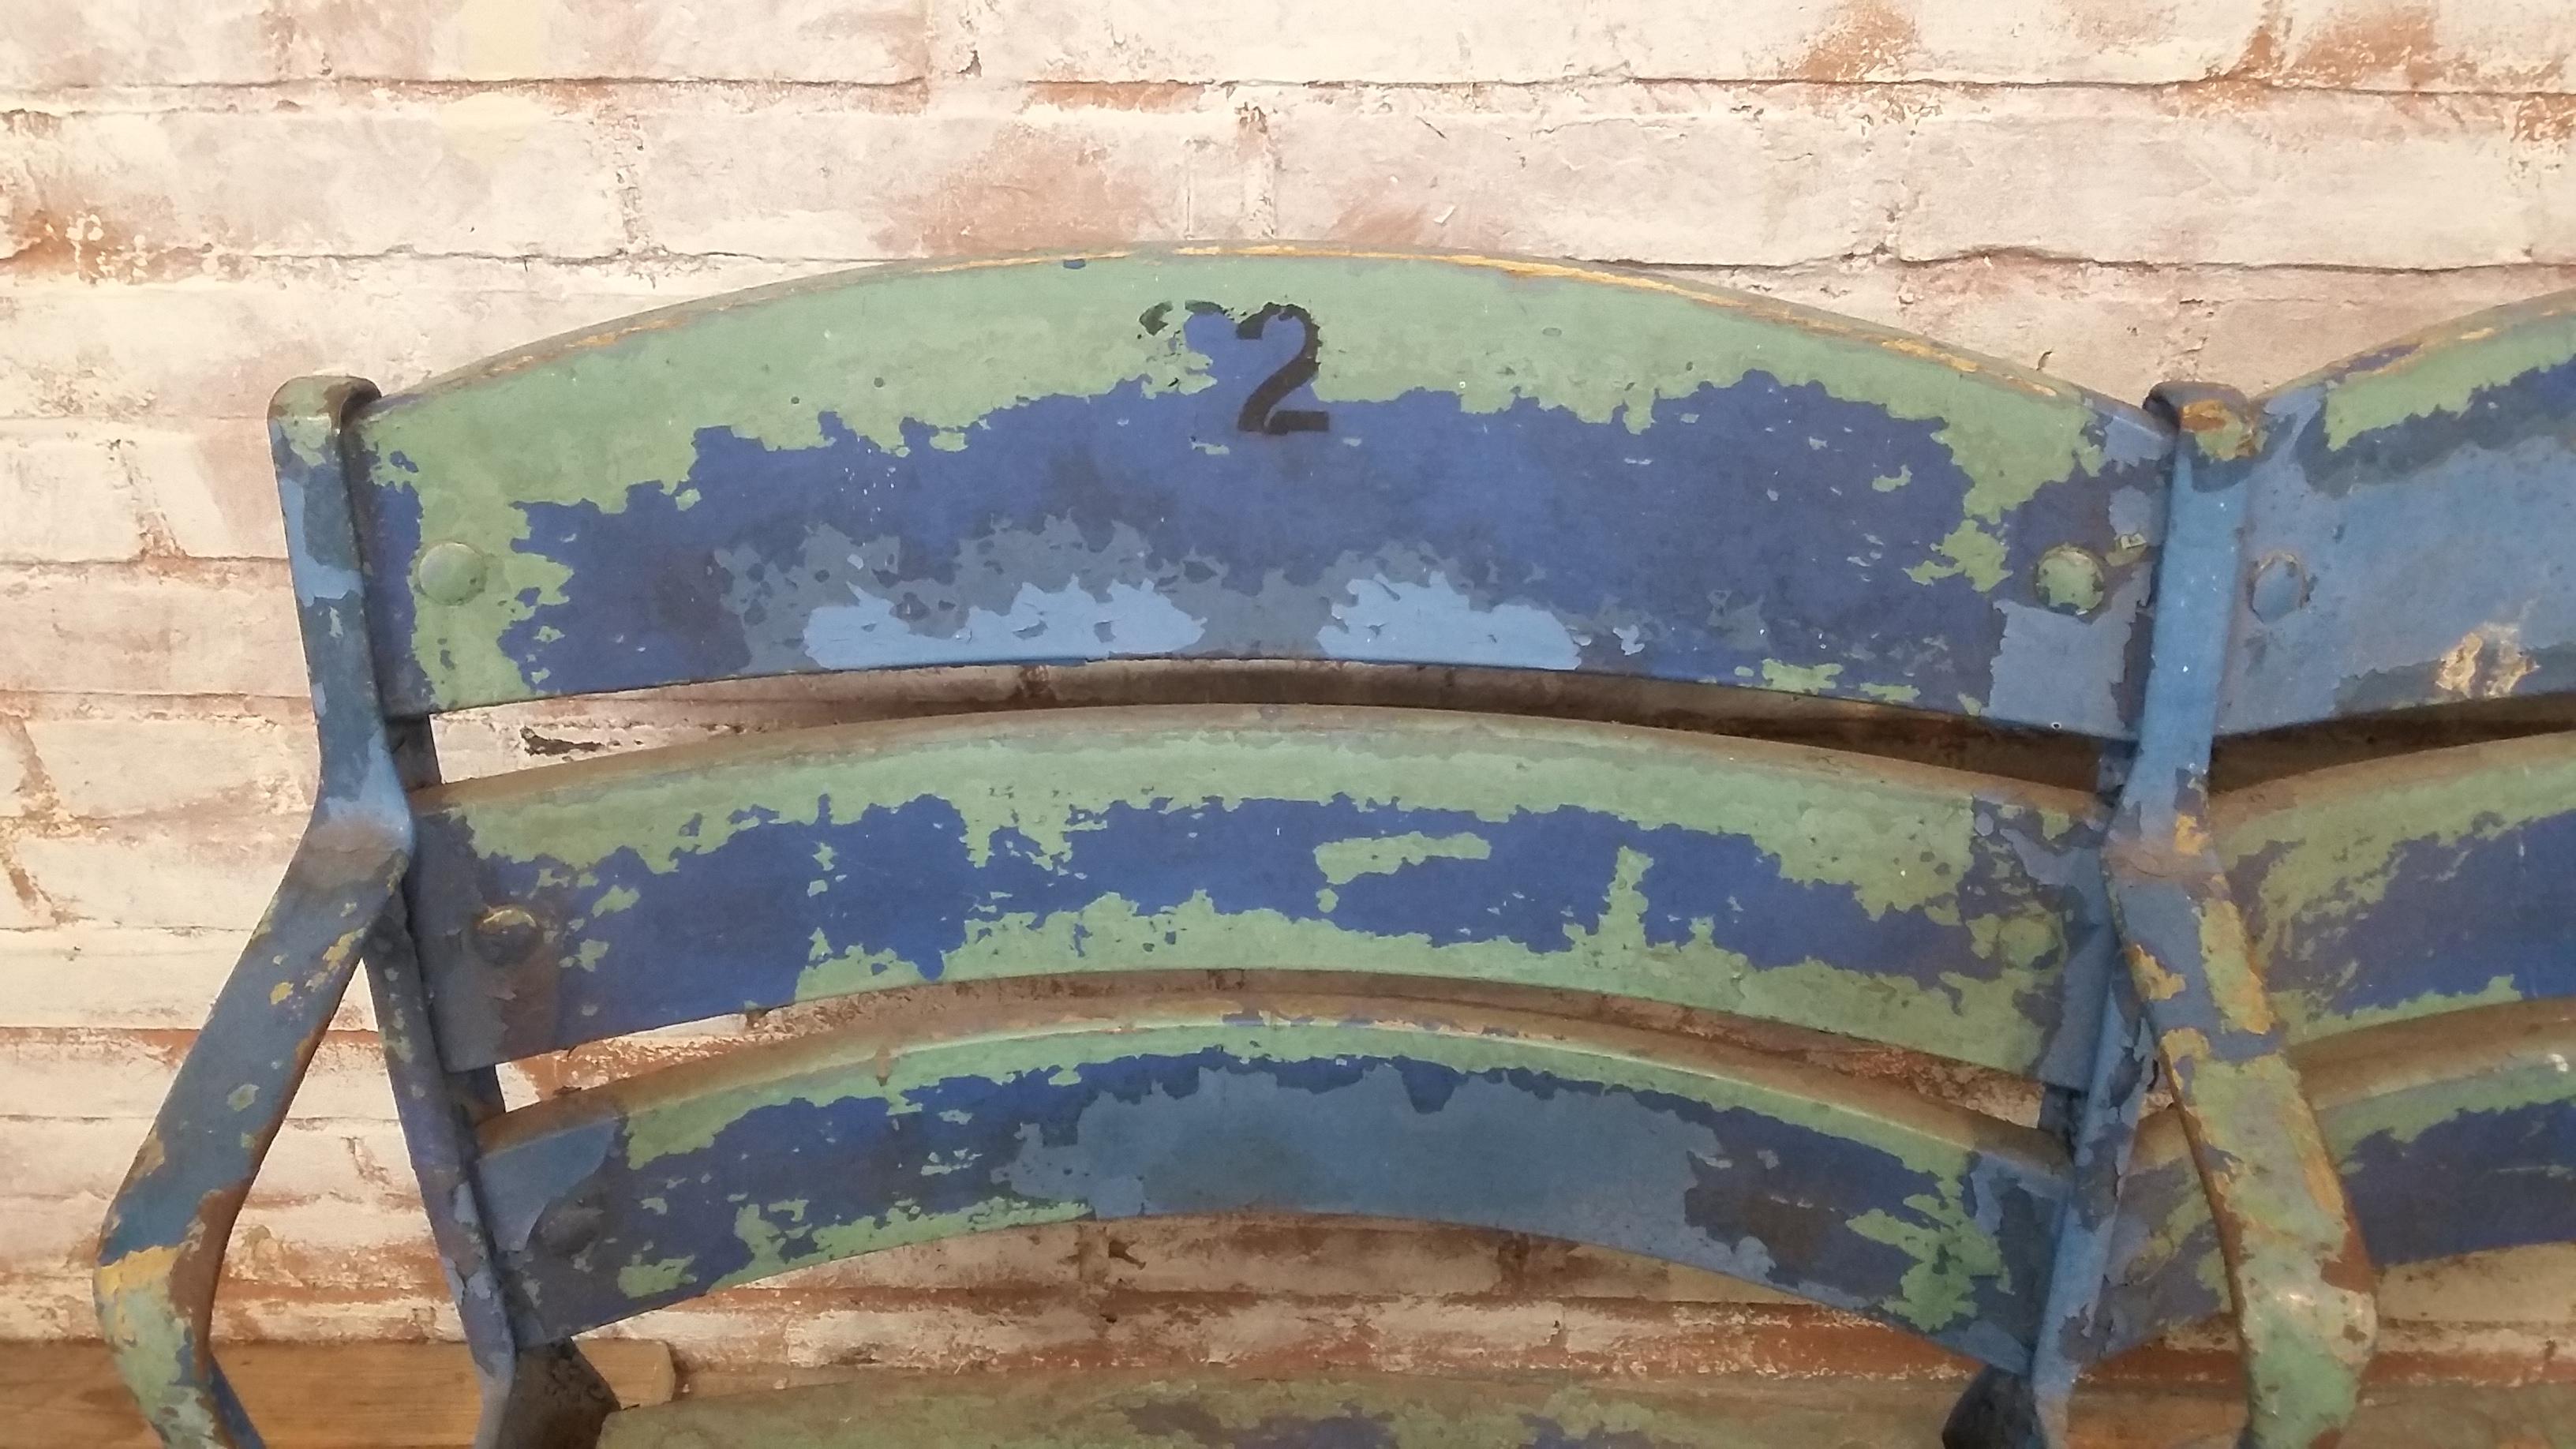 Authentic set of 2 Yankee Stadium seats, circa 1920s
Original paint, blue over green paint
Cast iron in good original condition
Has 2 or 3 slats that need to be repaired or replaced.